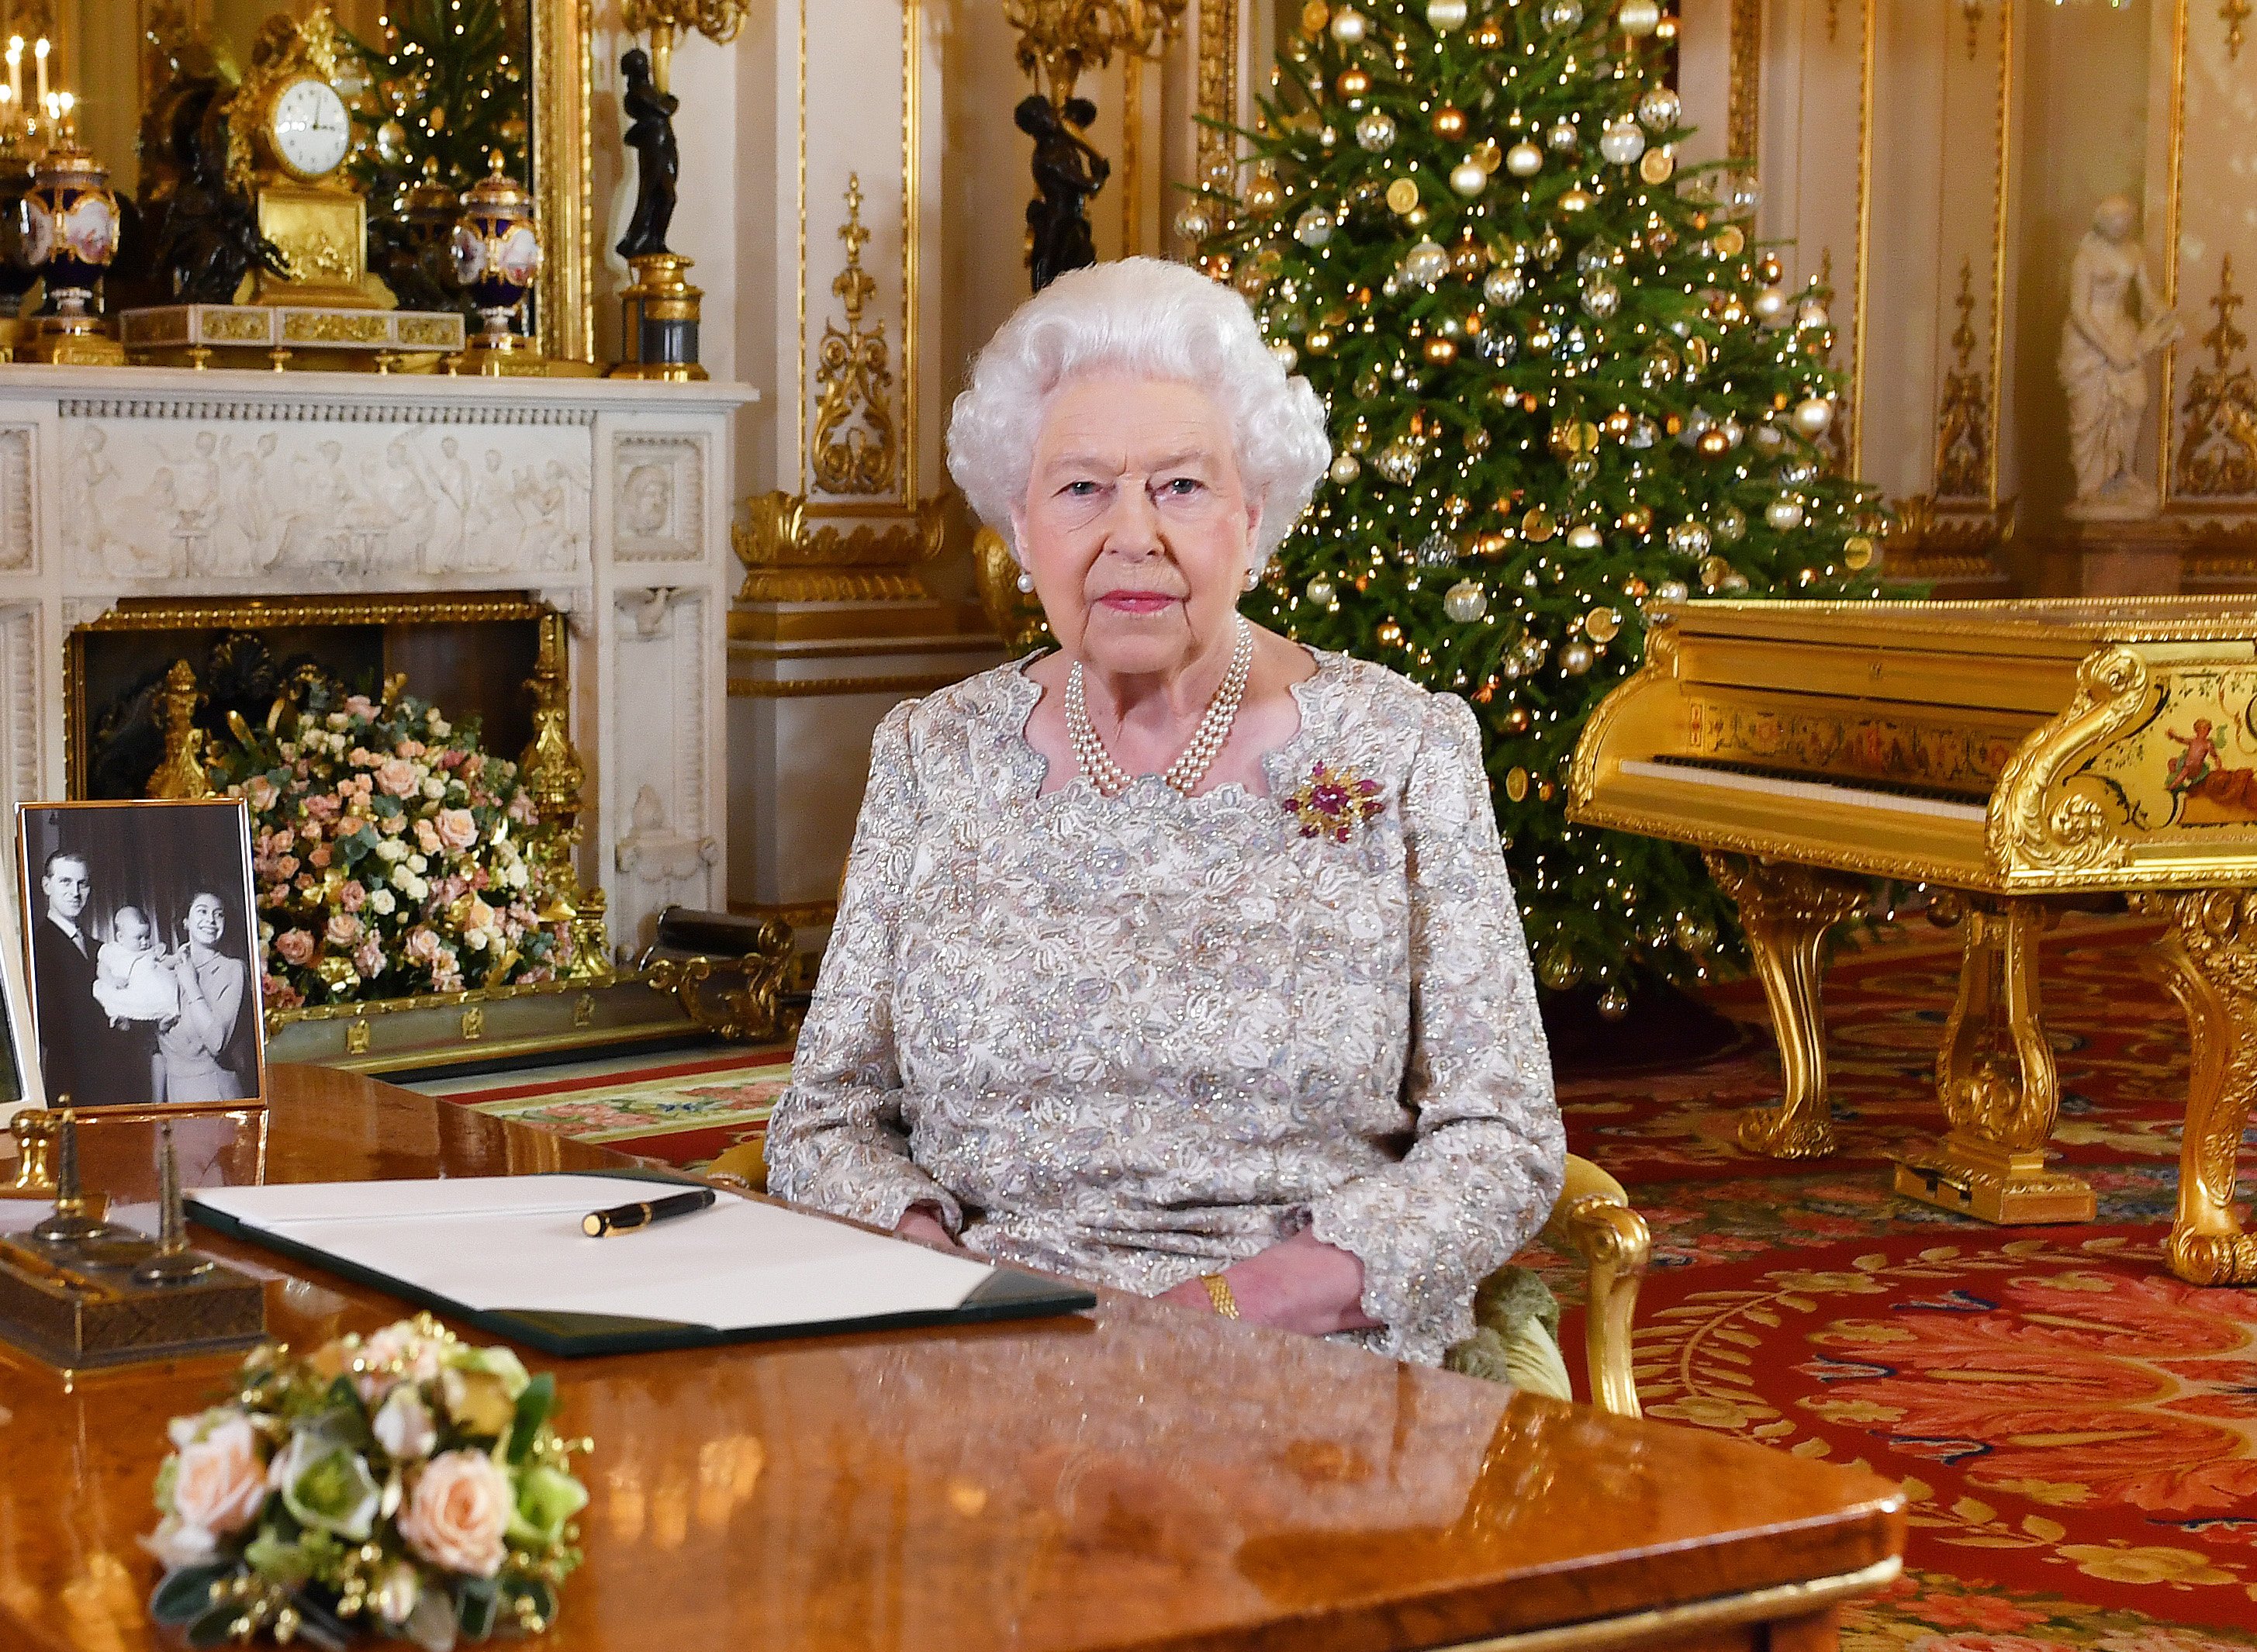 Queen Elizabeth II poses for a photo after recording her annual Christmas Day message in the White Drawing Room at Buckingham Palace in a photo released on December 24, 2018 in London, Britain.  |  Source: Getty Images